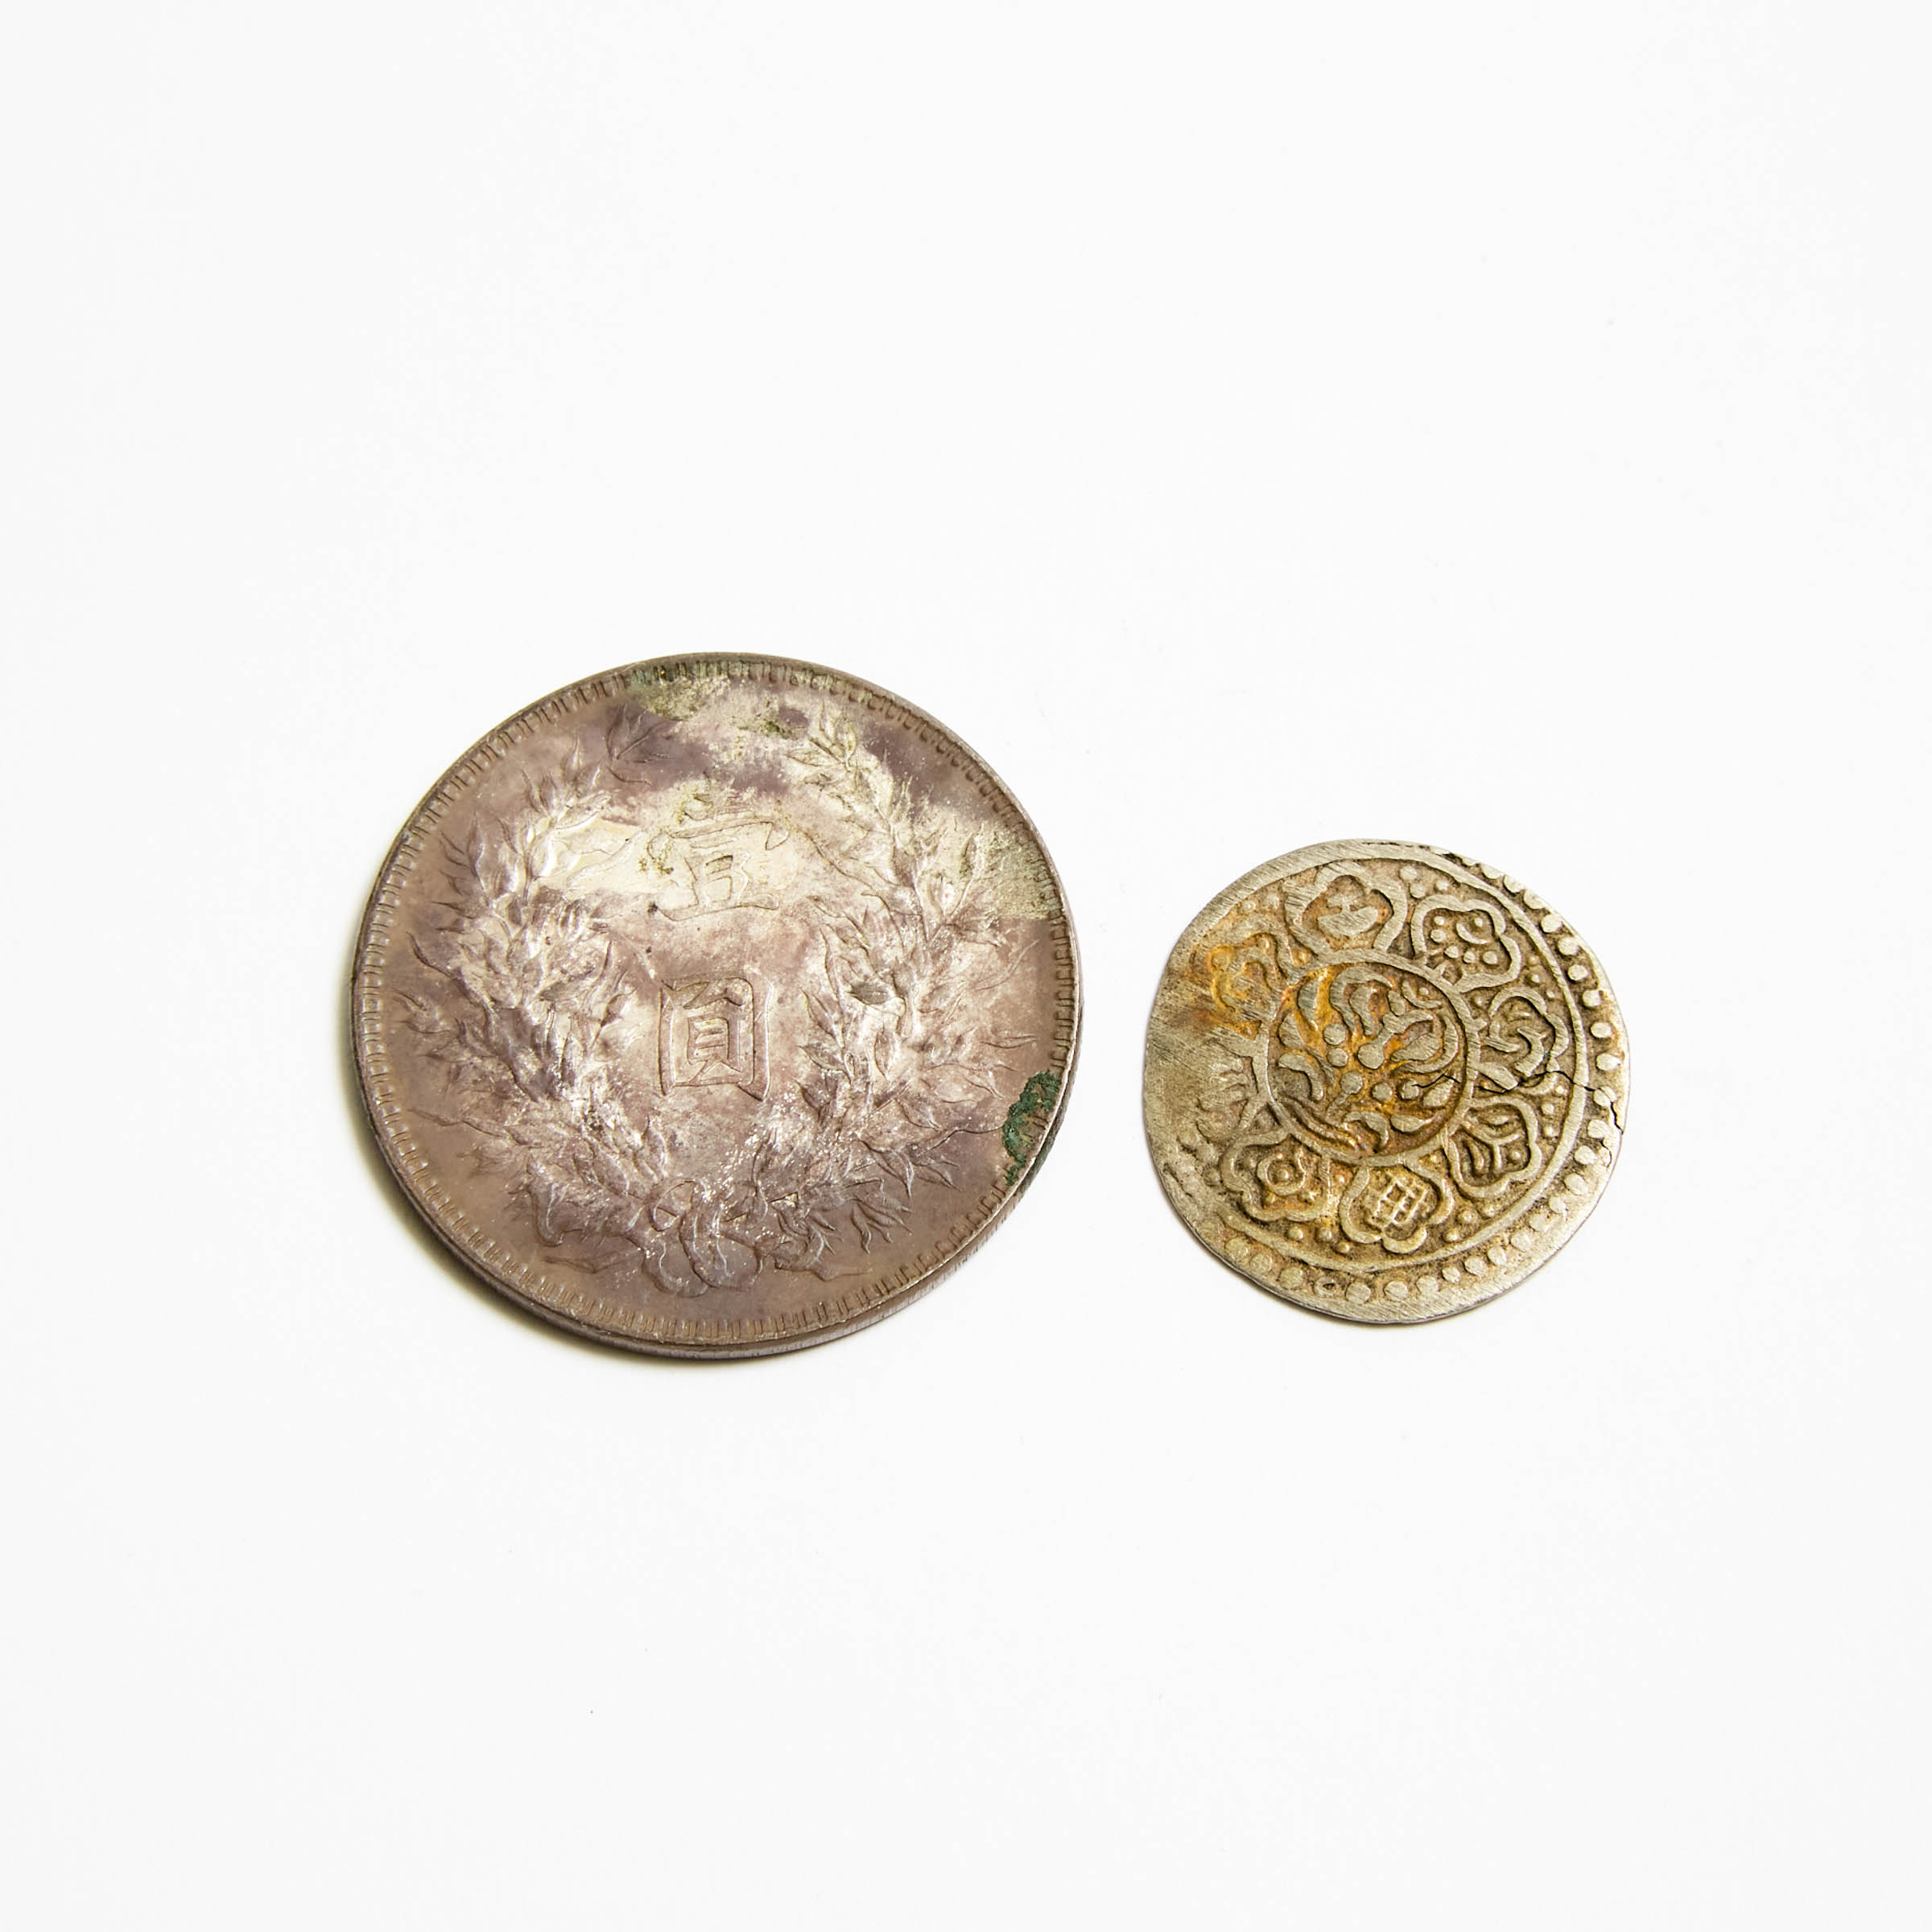 A Chinese Silver One Dollar 'Fat Man' Coin, UNC/AU, 1921, Together With a Tibetan Tangka Coin